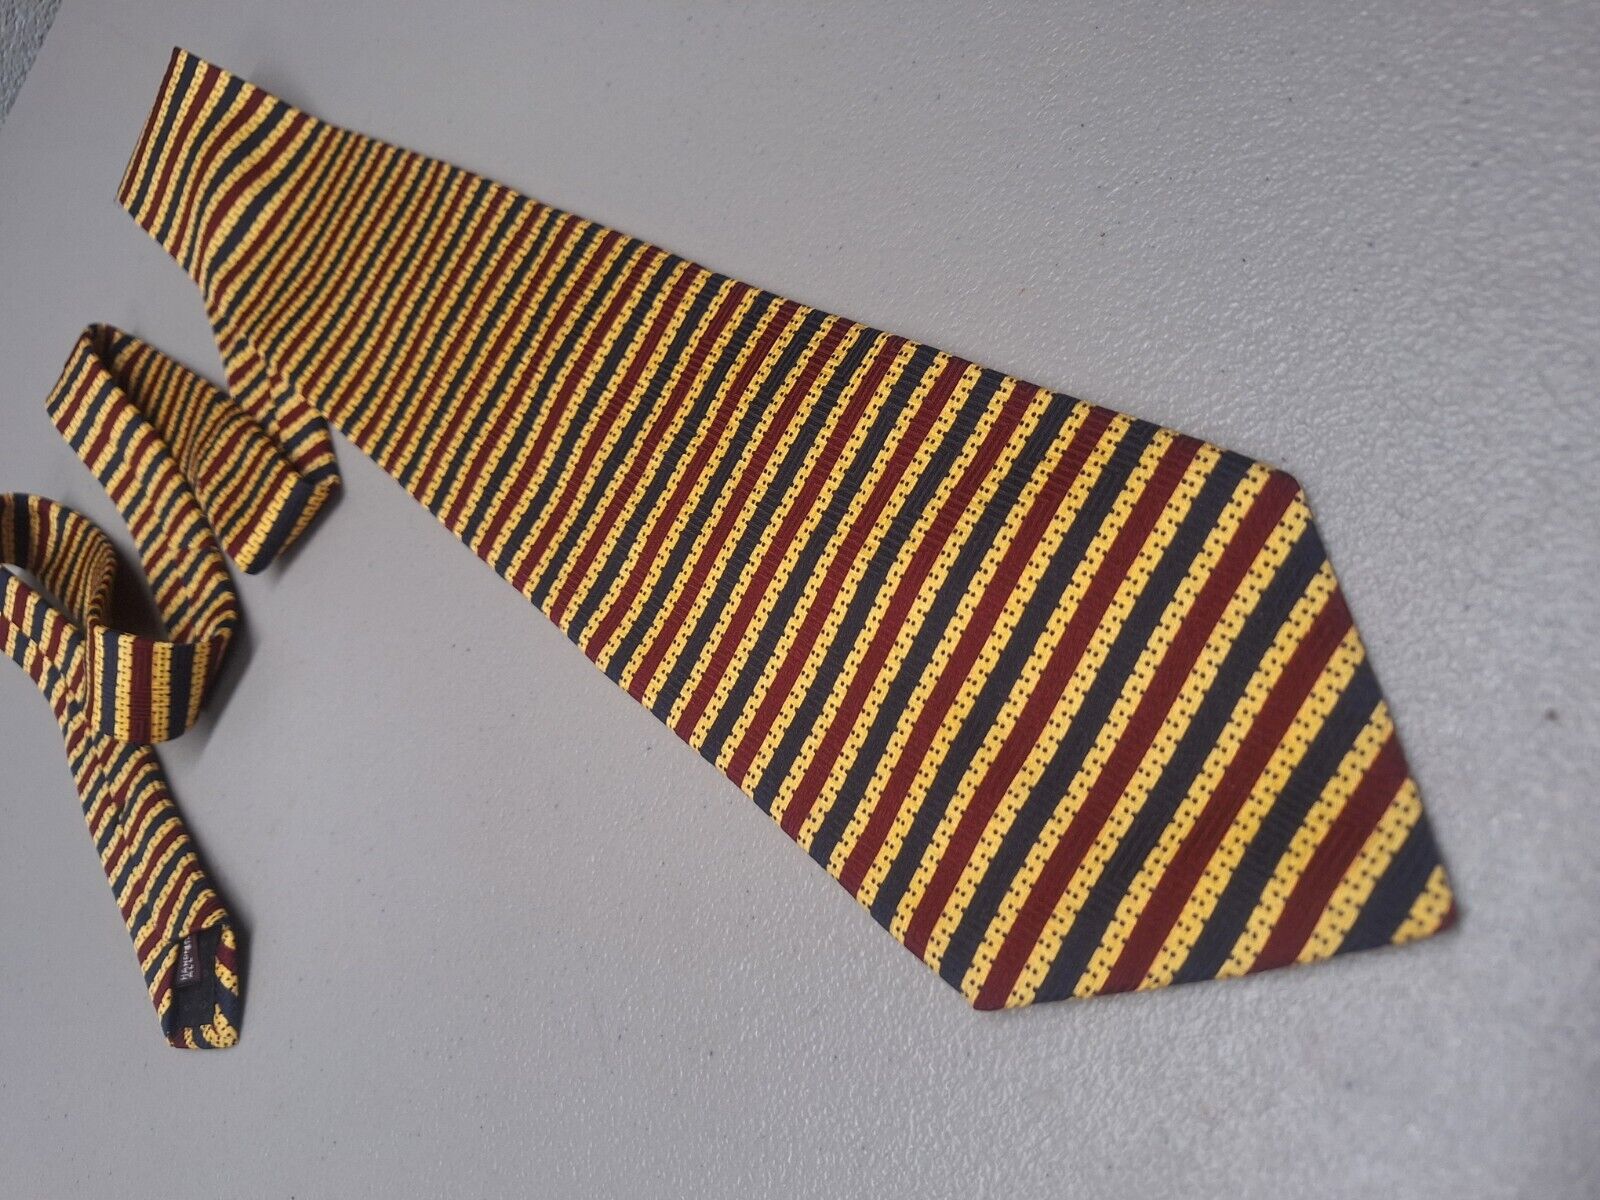 Raphael Men's All Silk Neck Tie Striped Hand Made in Italy Suit Tie